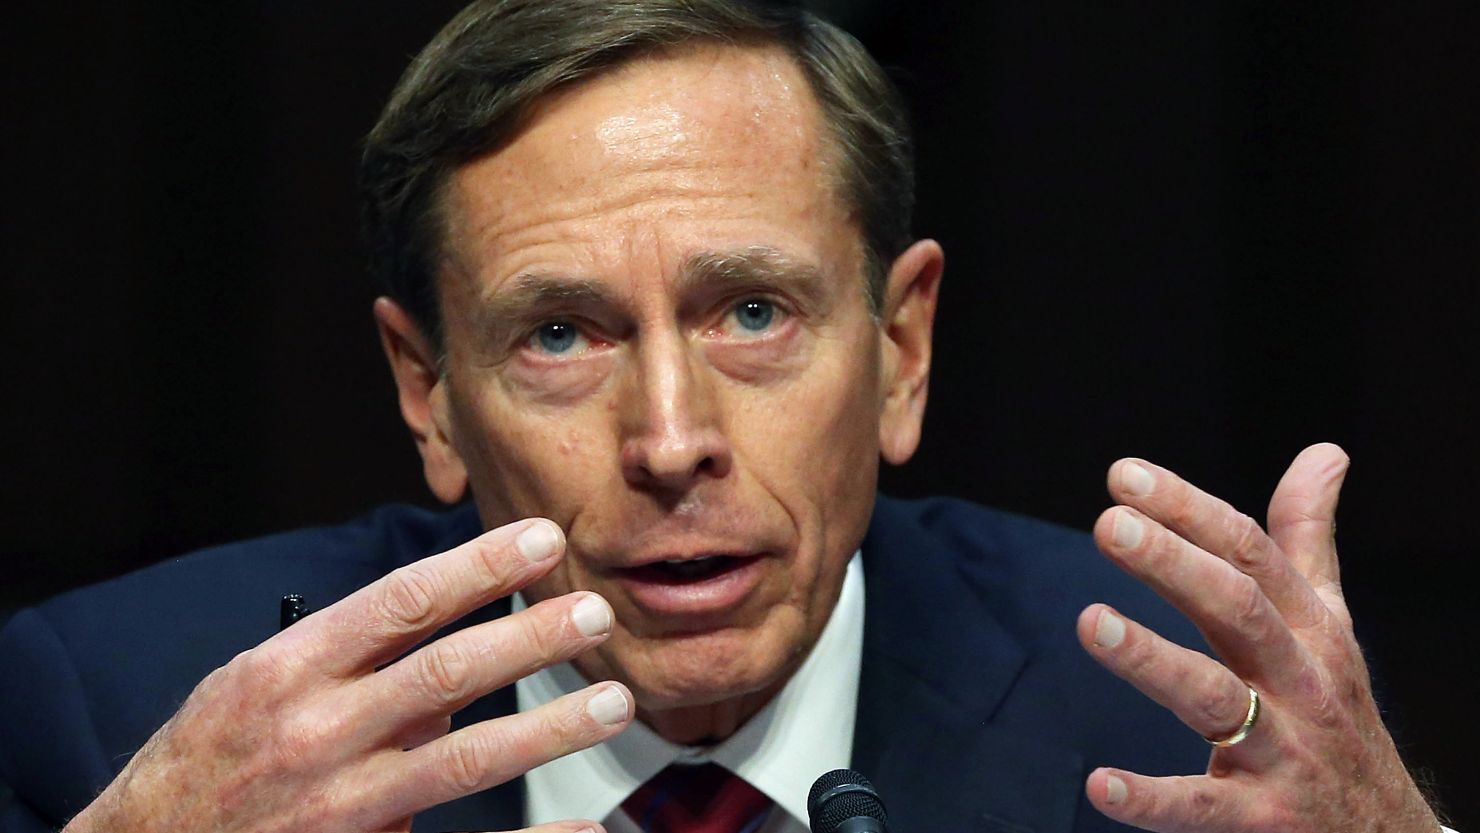 Retired U.S. Army Gen. David Petraeus speaks during a Senate Armed Services Committee hearing on Capitol Hill on September 22, 2015 in Washington.